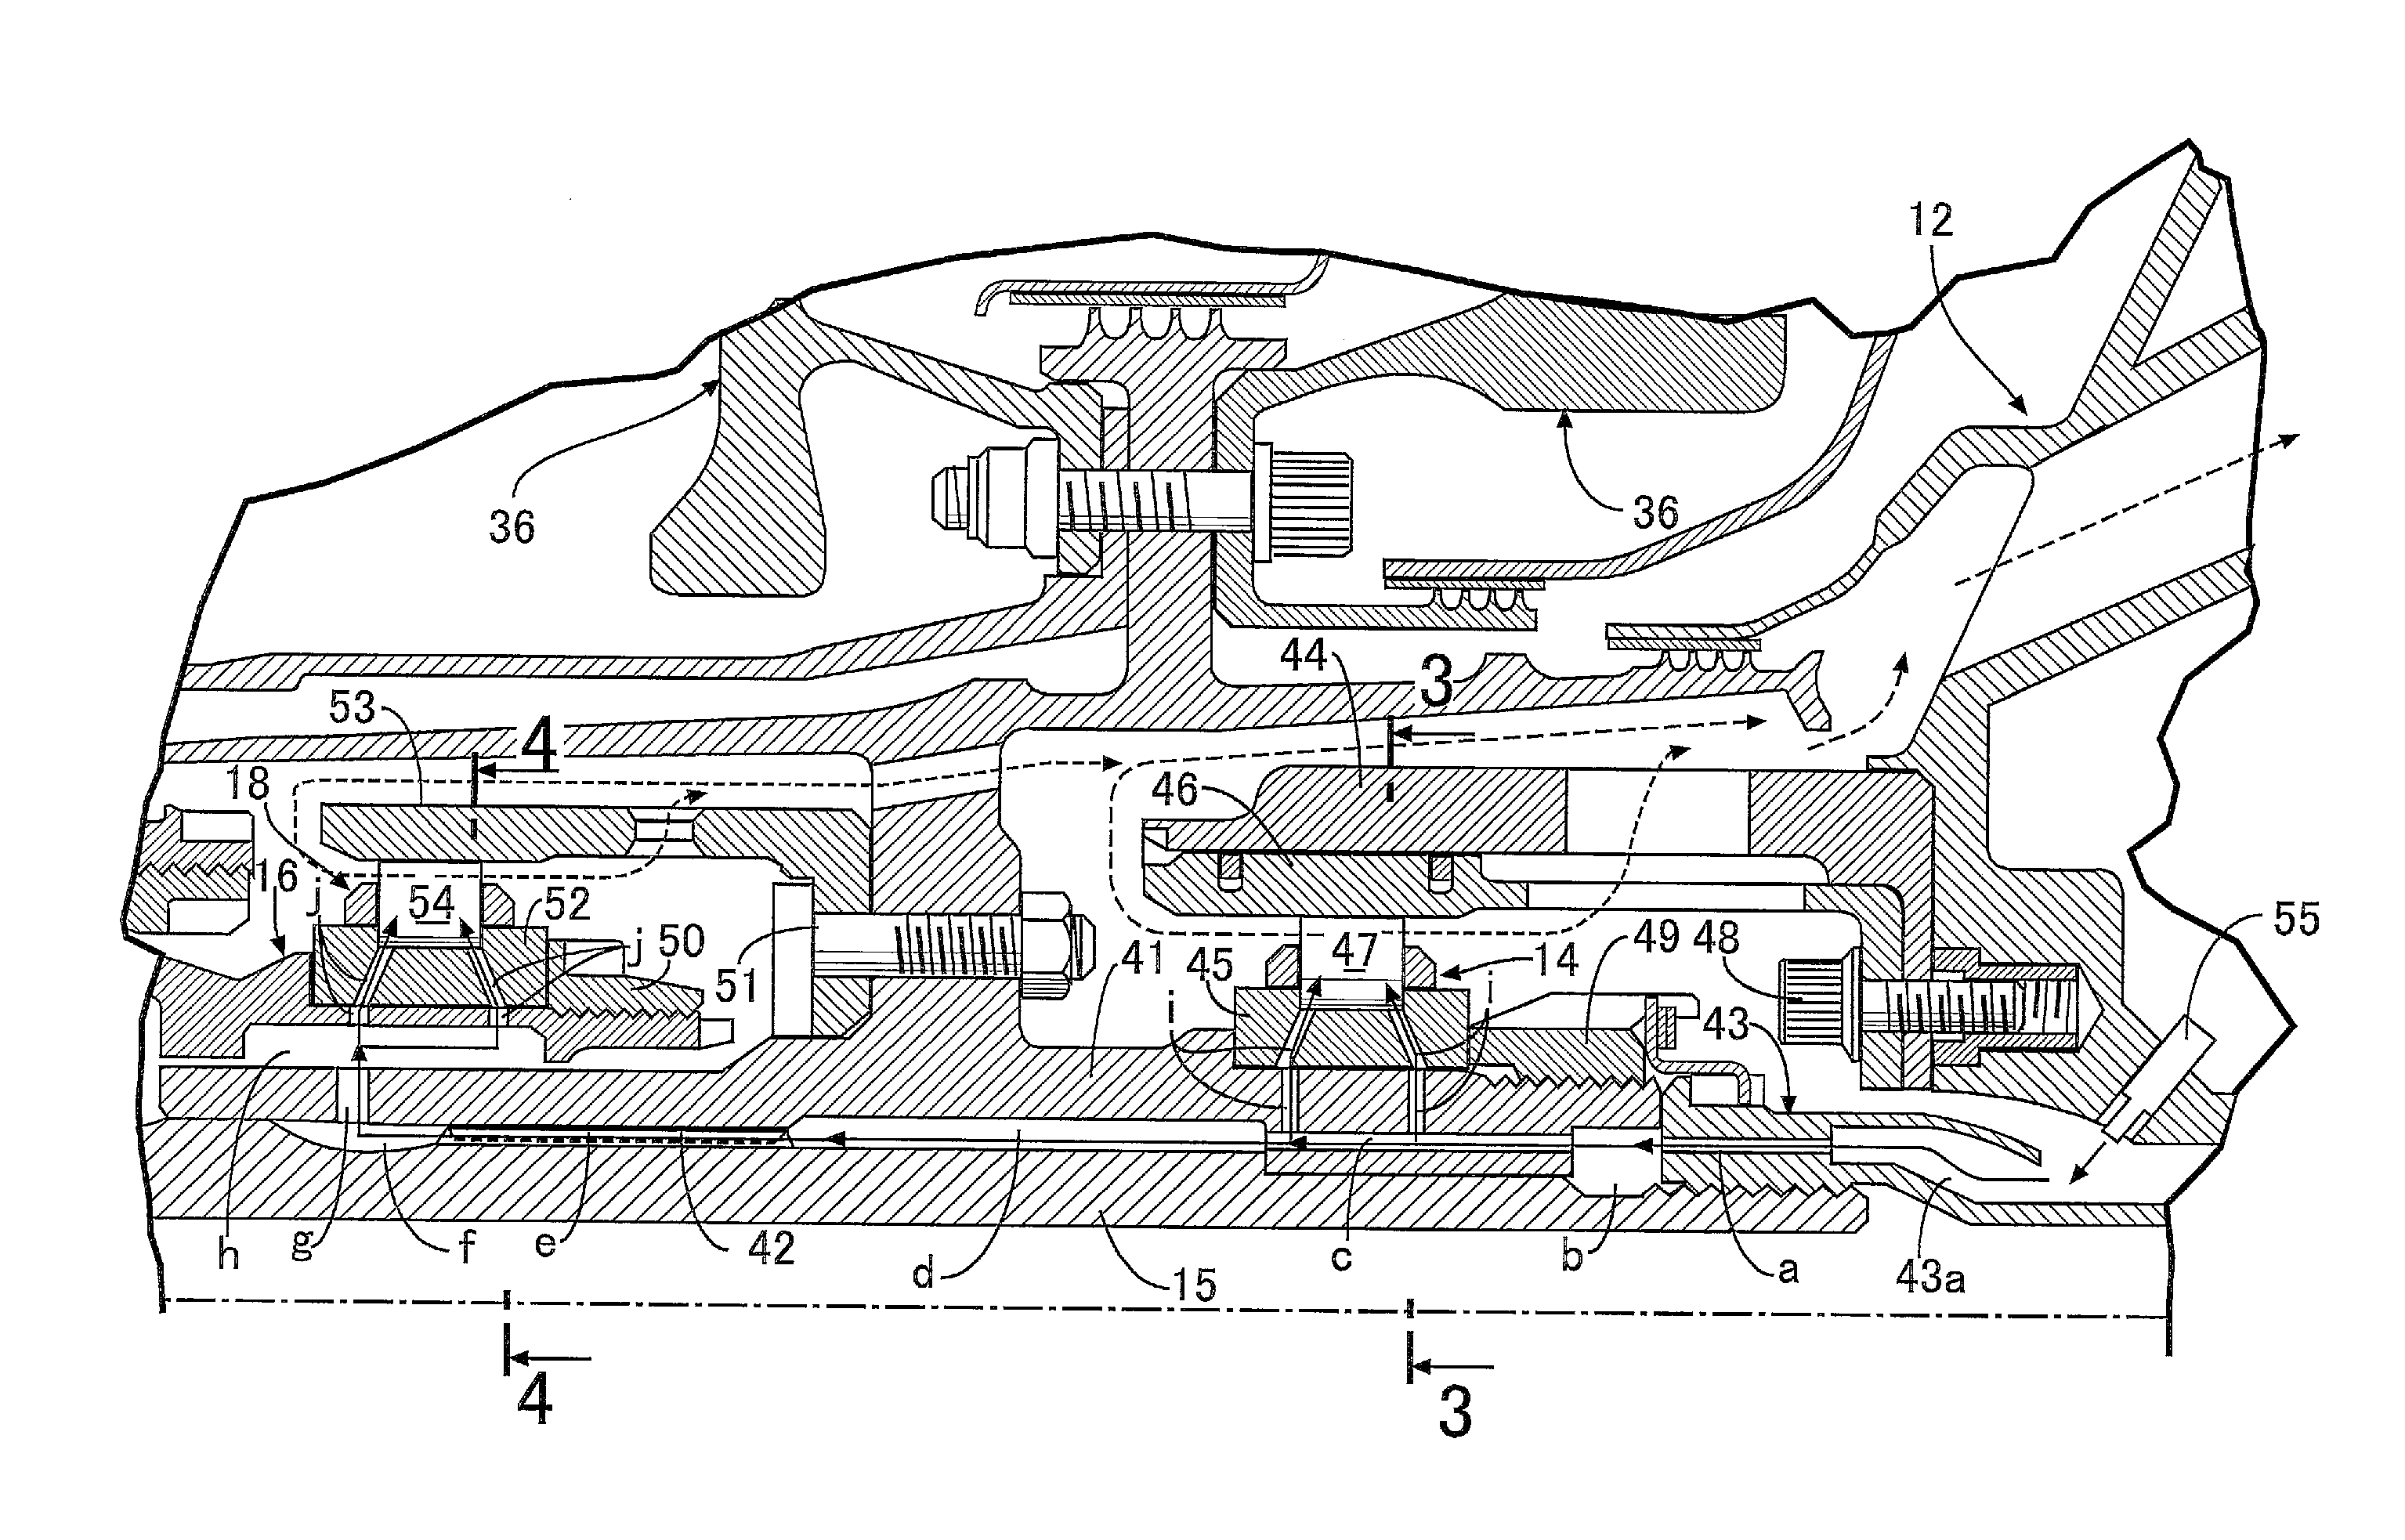 Bearing lubricating structure for gas turbine engine